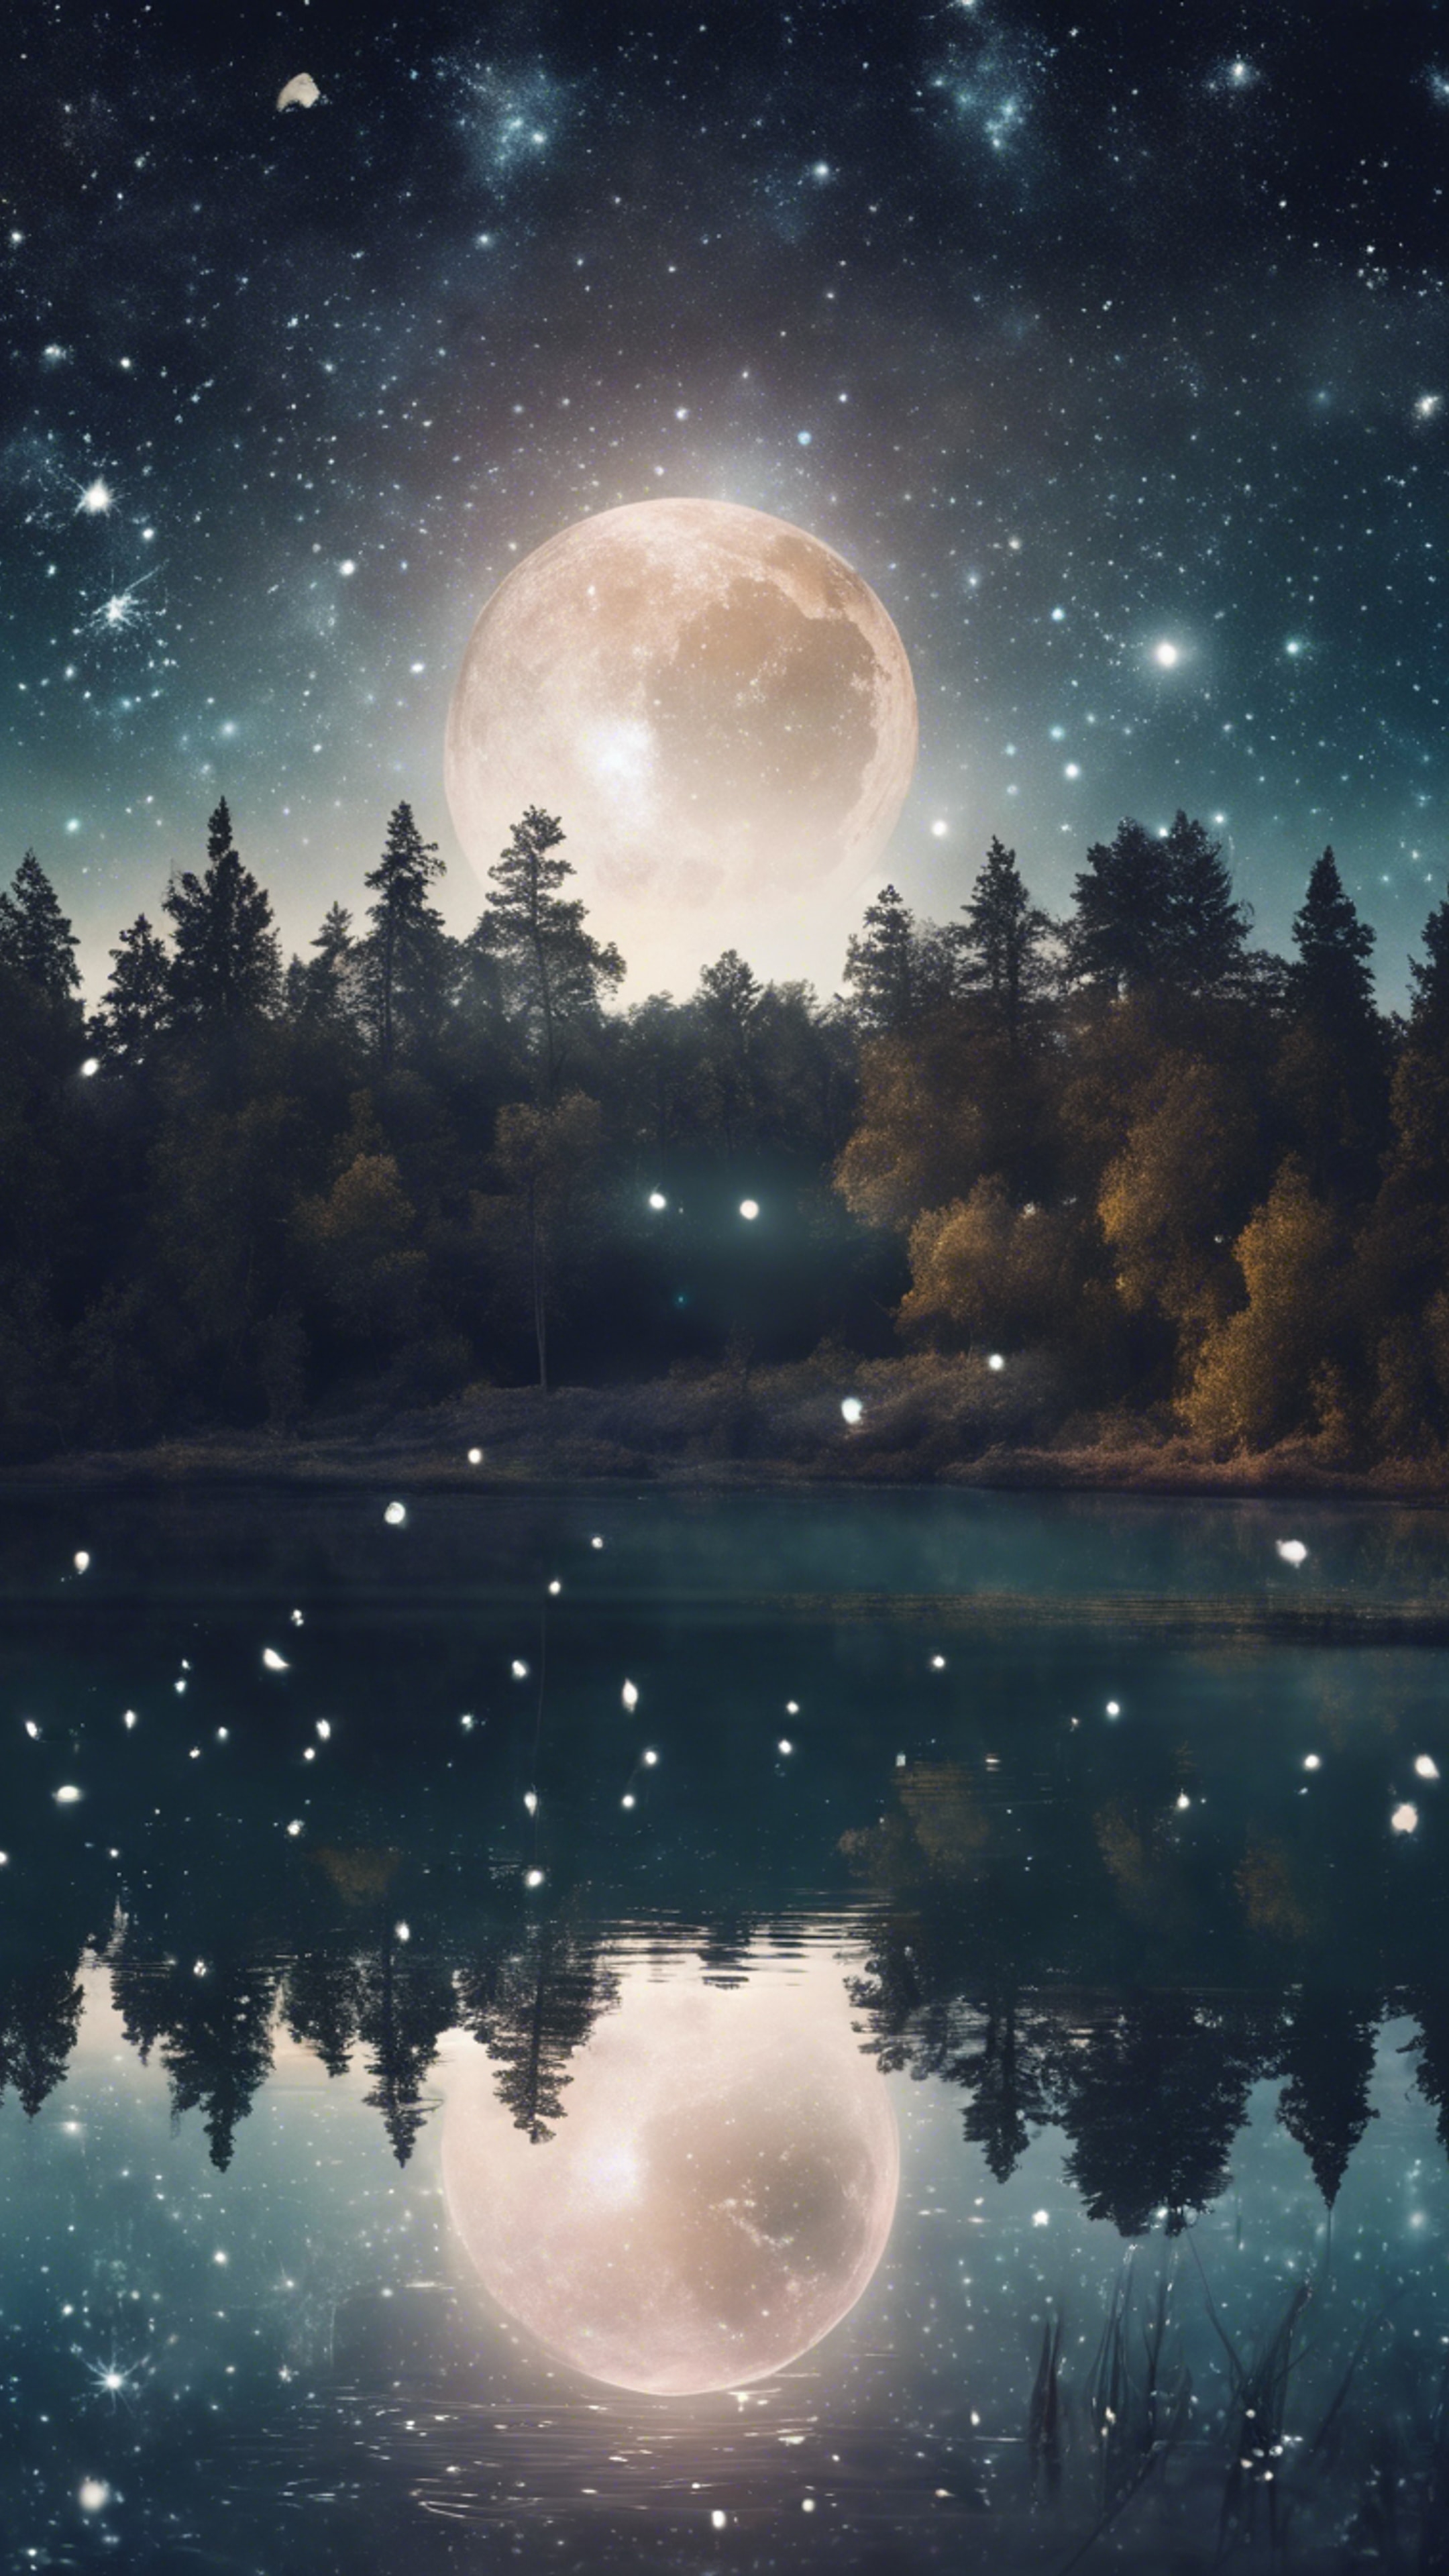 A mystical night sky over a tranquil lake, filled with sparkling constellations and a magical, translucent moon. Tapéta[02f115e6e6dc4626b628]